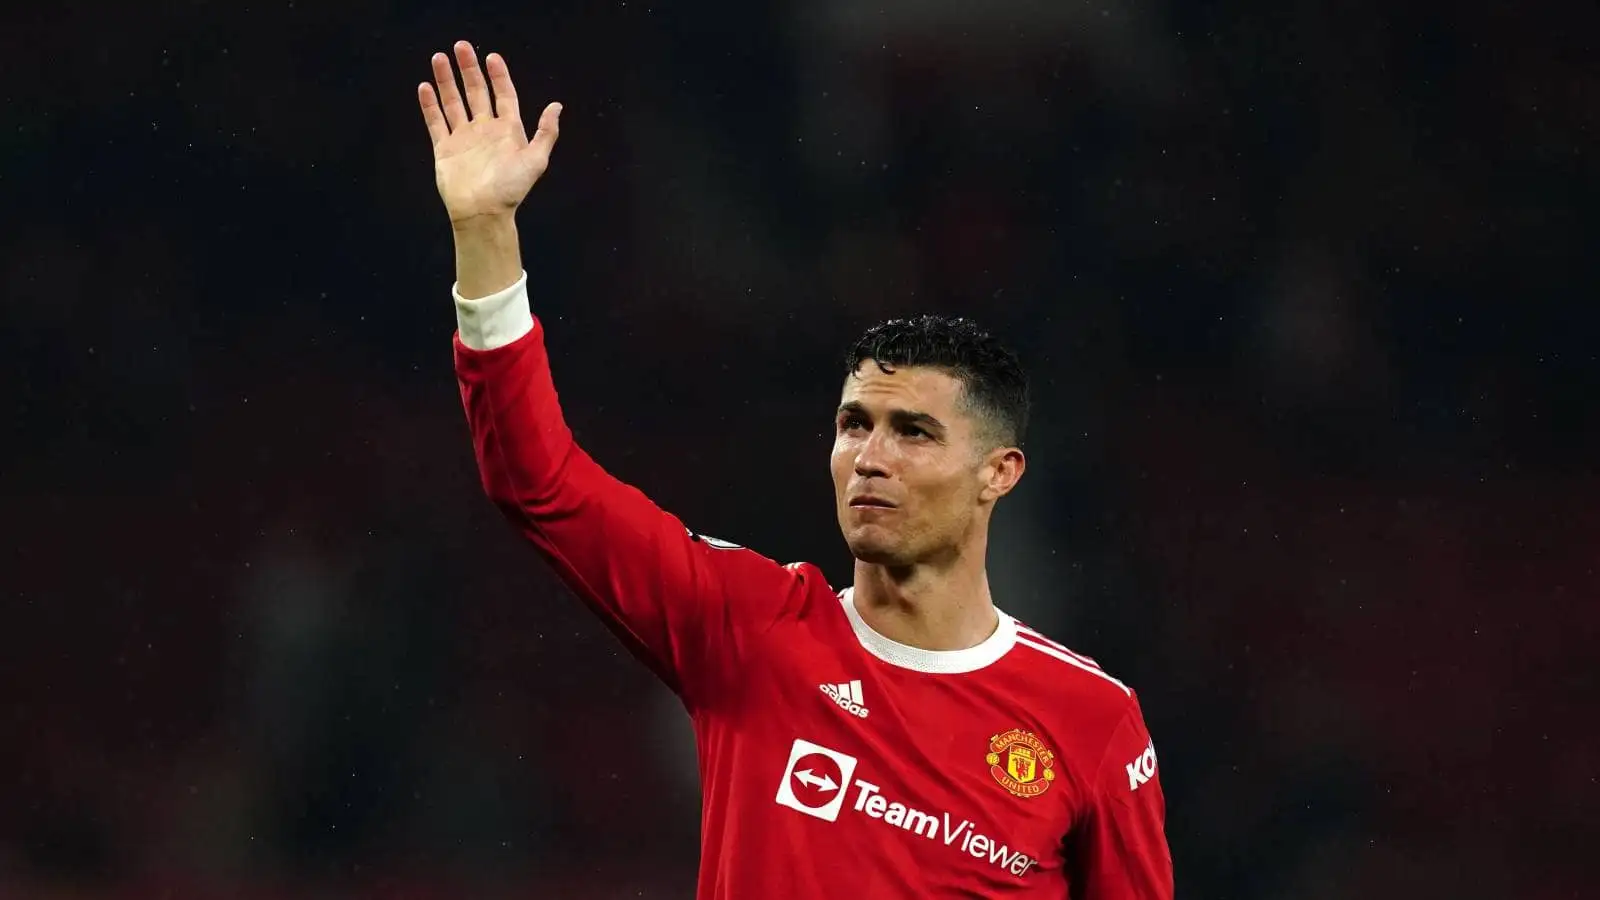 Cristiano Ronaldo waving to the Old Trafford crowd after a Manchester United win